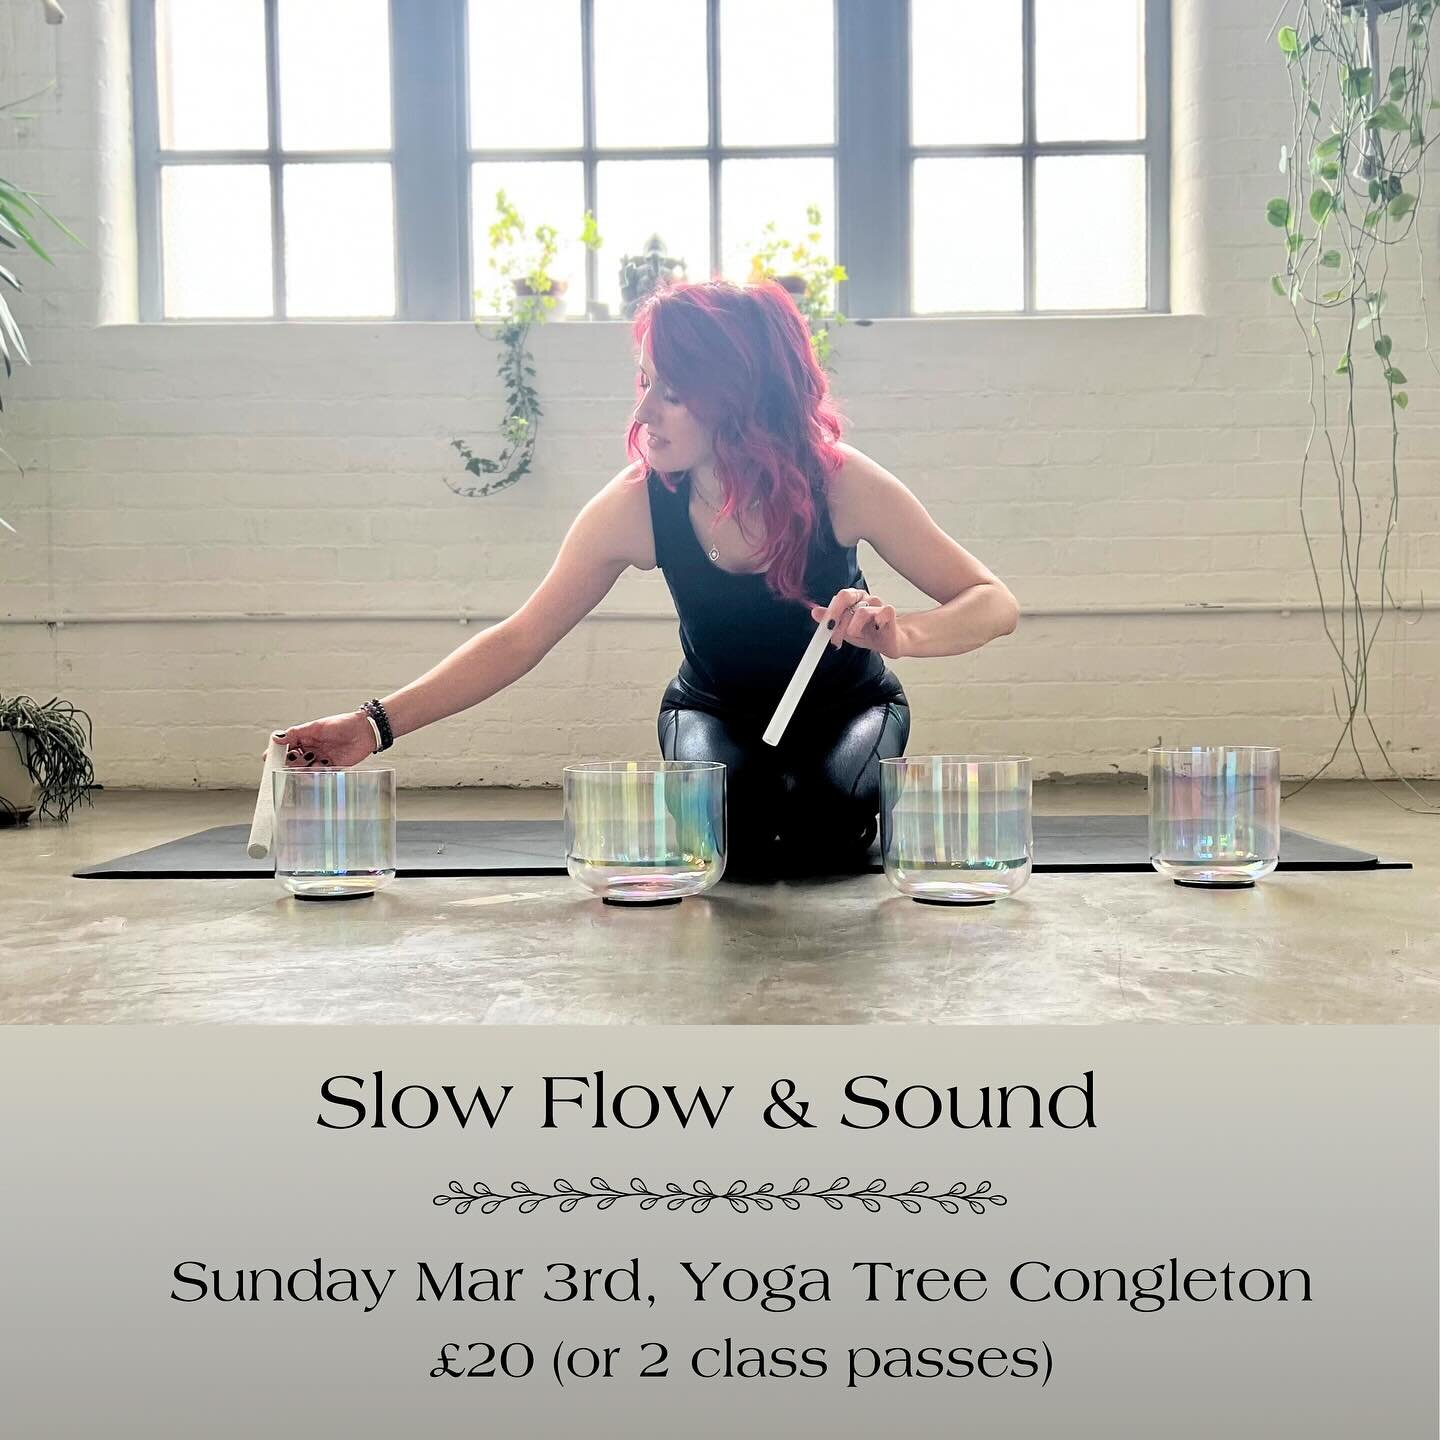 Next weekend, Sunday session&hellip;

***Slow Flow &amp; Sacred Sound*** 
18:00 - 20:00 at The Yoga Tree, Congleton.

A gentle, yet deep practice, inviting you to turn your focus inwards and gently work into areas we typically hold tension and stress